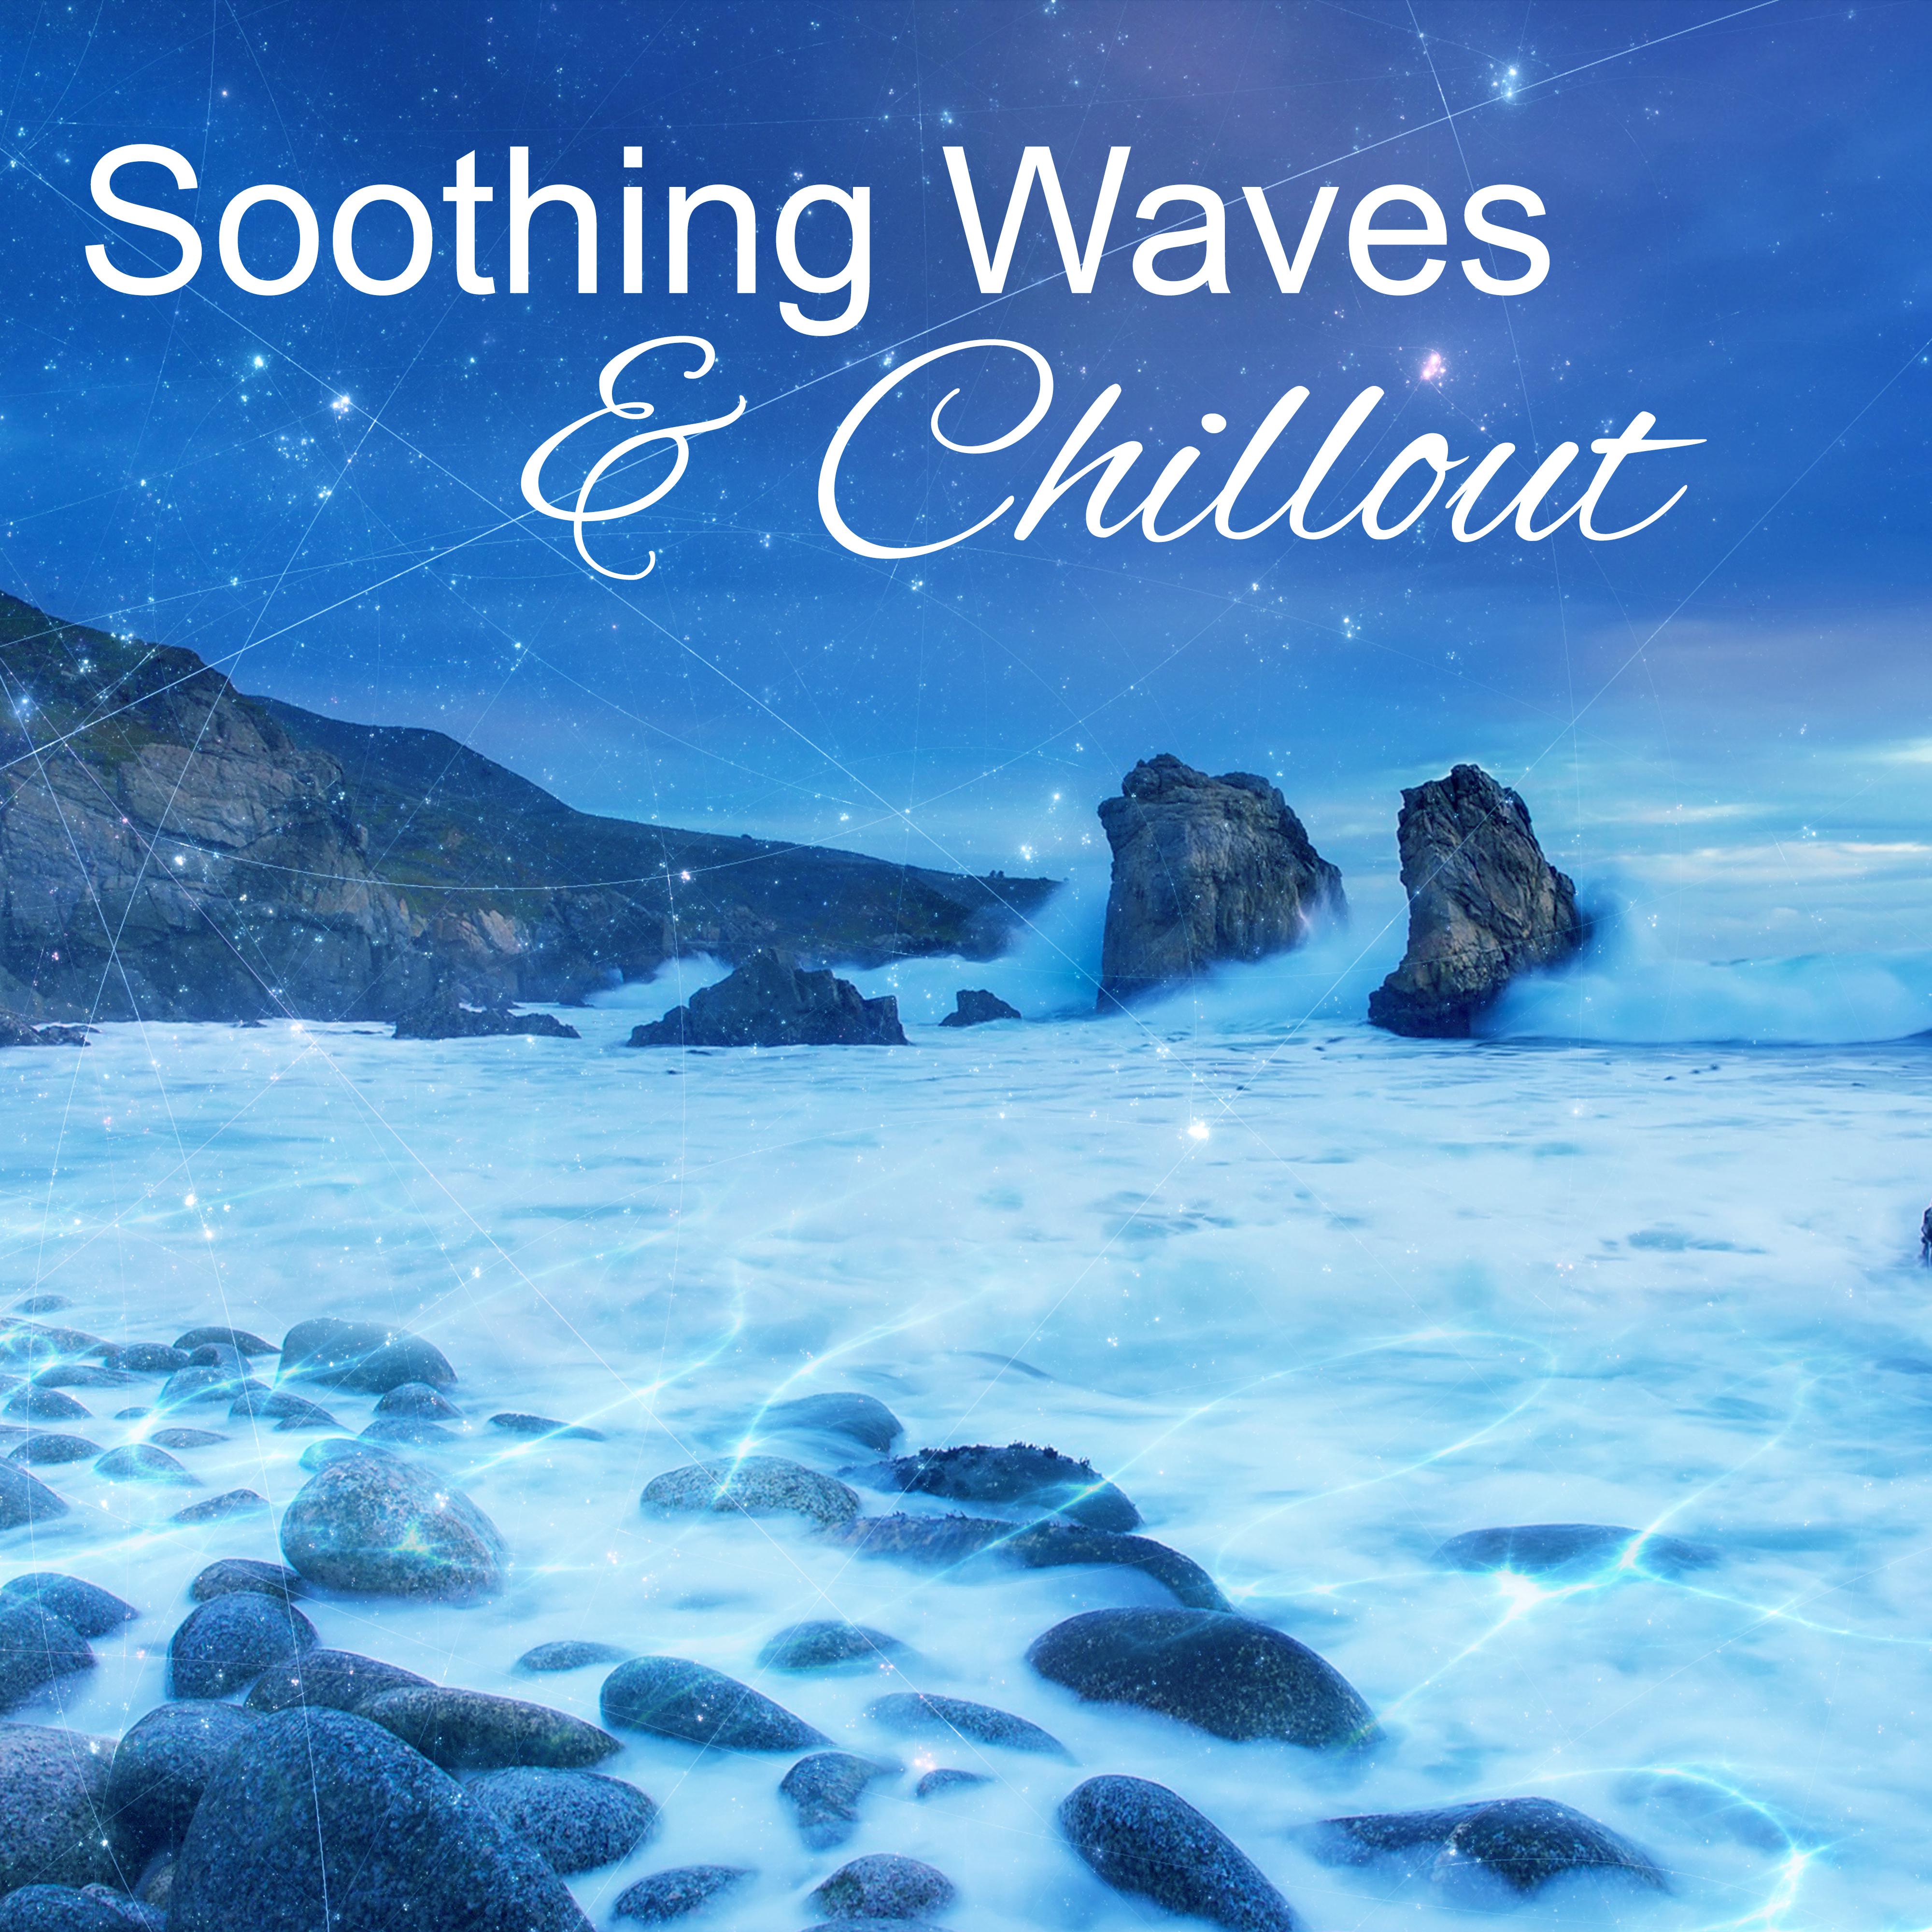 Soothing Waves & Chillout – Music for Relaxation, Deep Sleep, Sea Sounds, Gentle Waves, Nature Sounds to Rest, Calmness